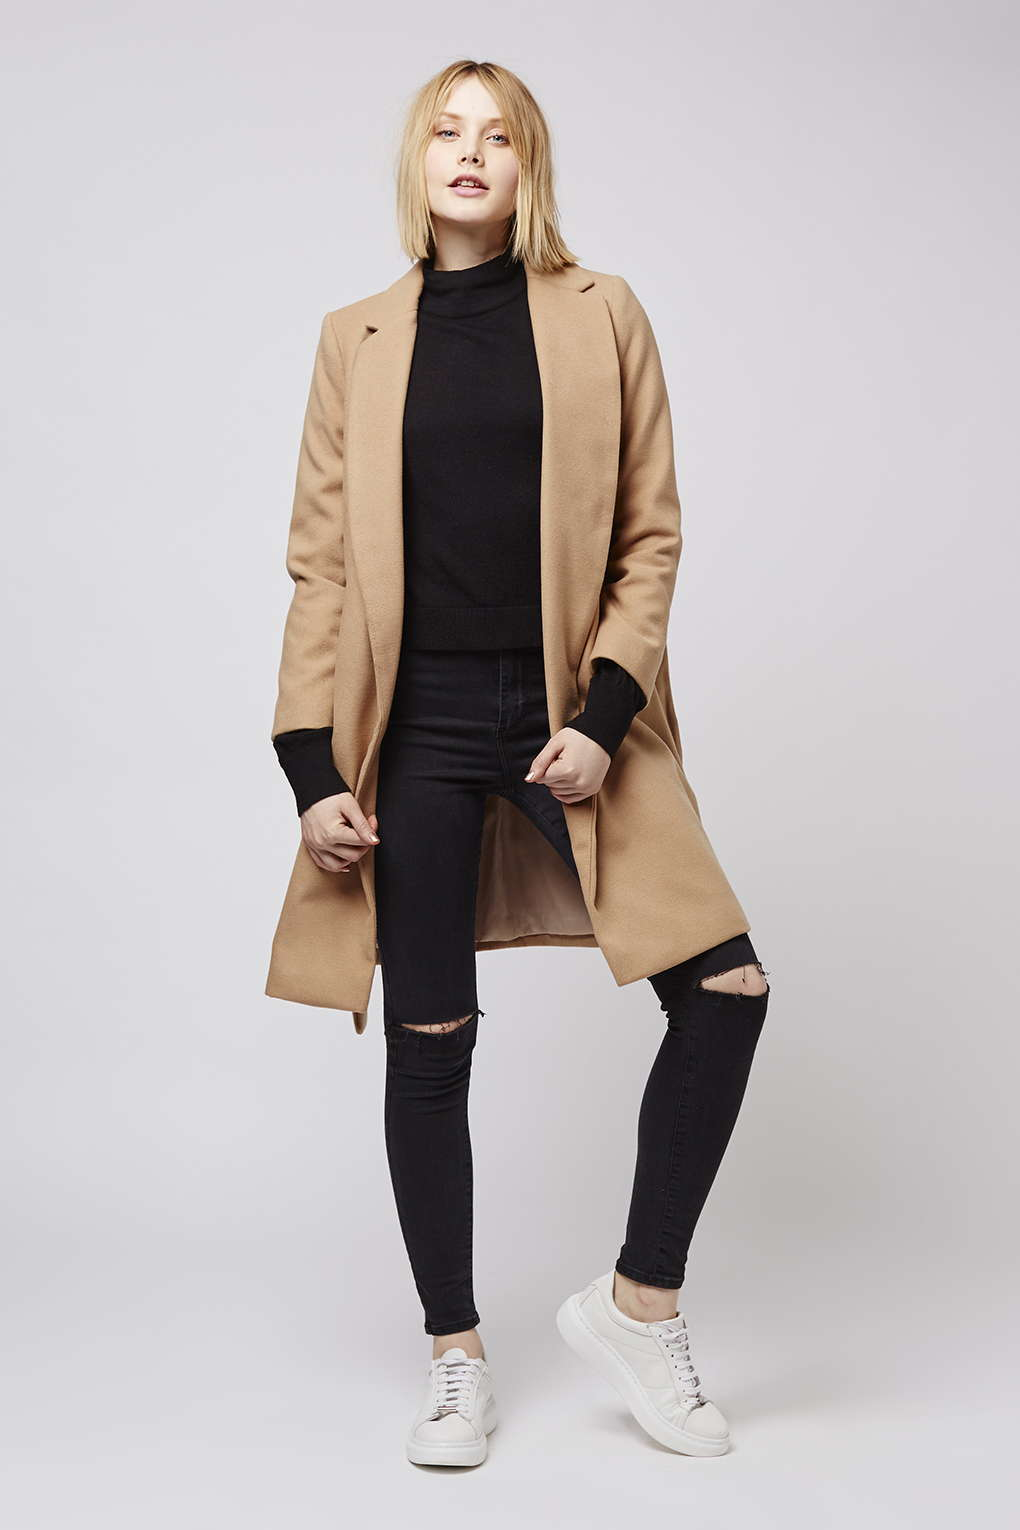 Topshop Petite Belted Coat in Natural | Lyst